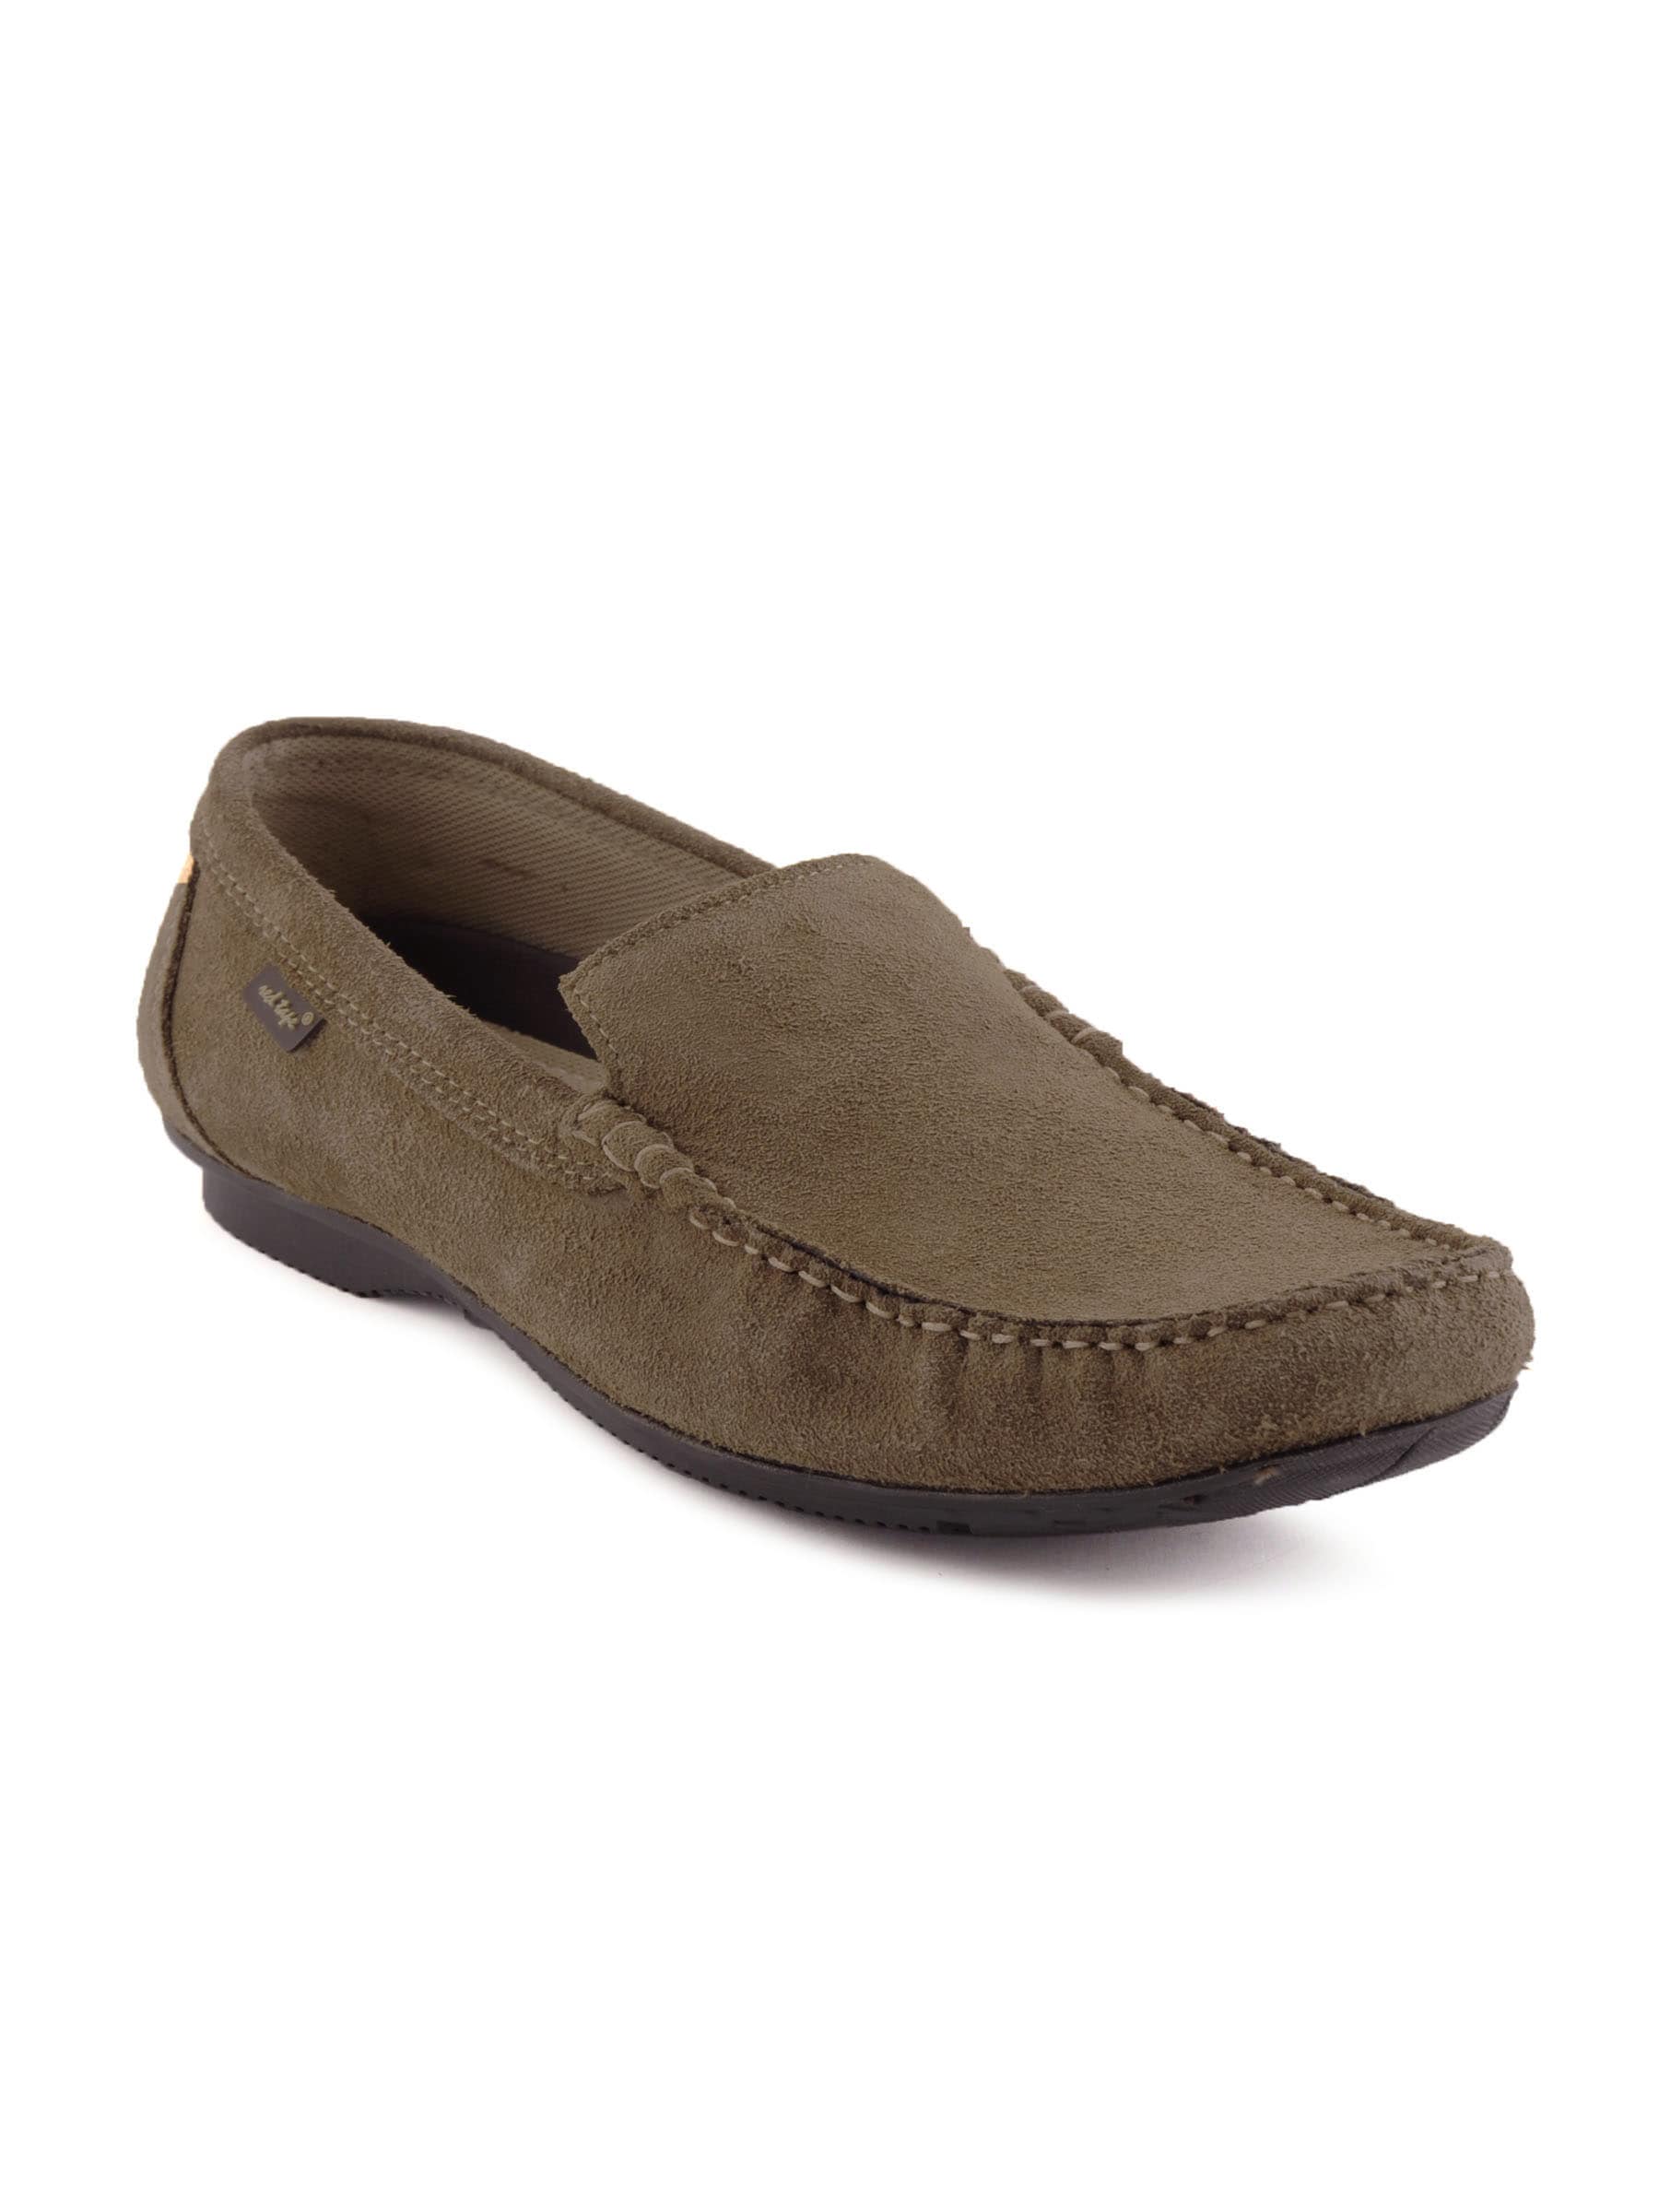 Red Tape Men's Stone Casual Shoe